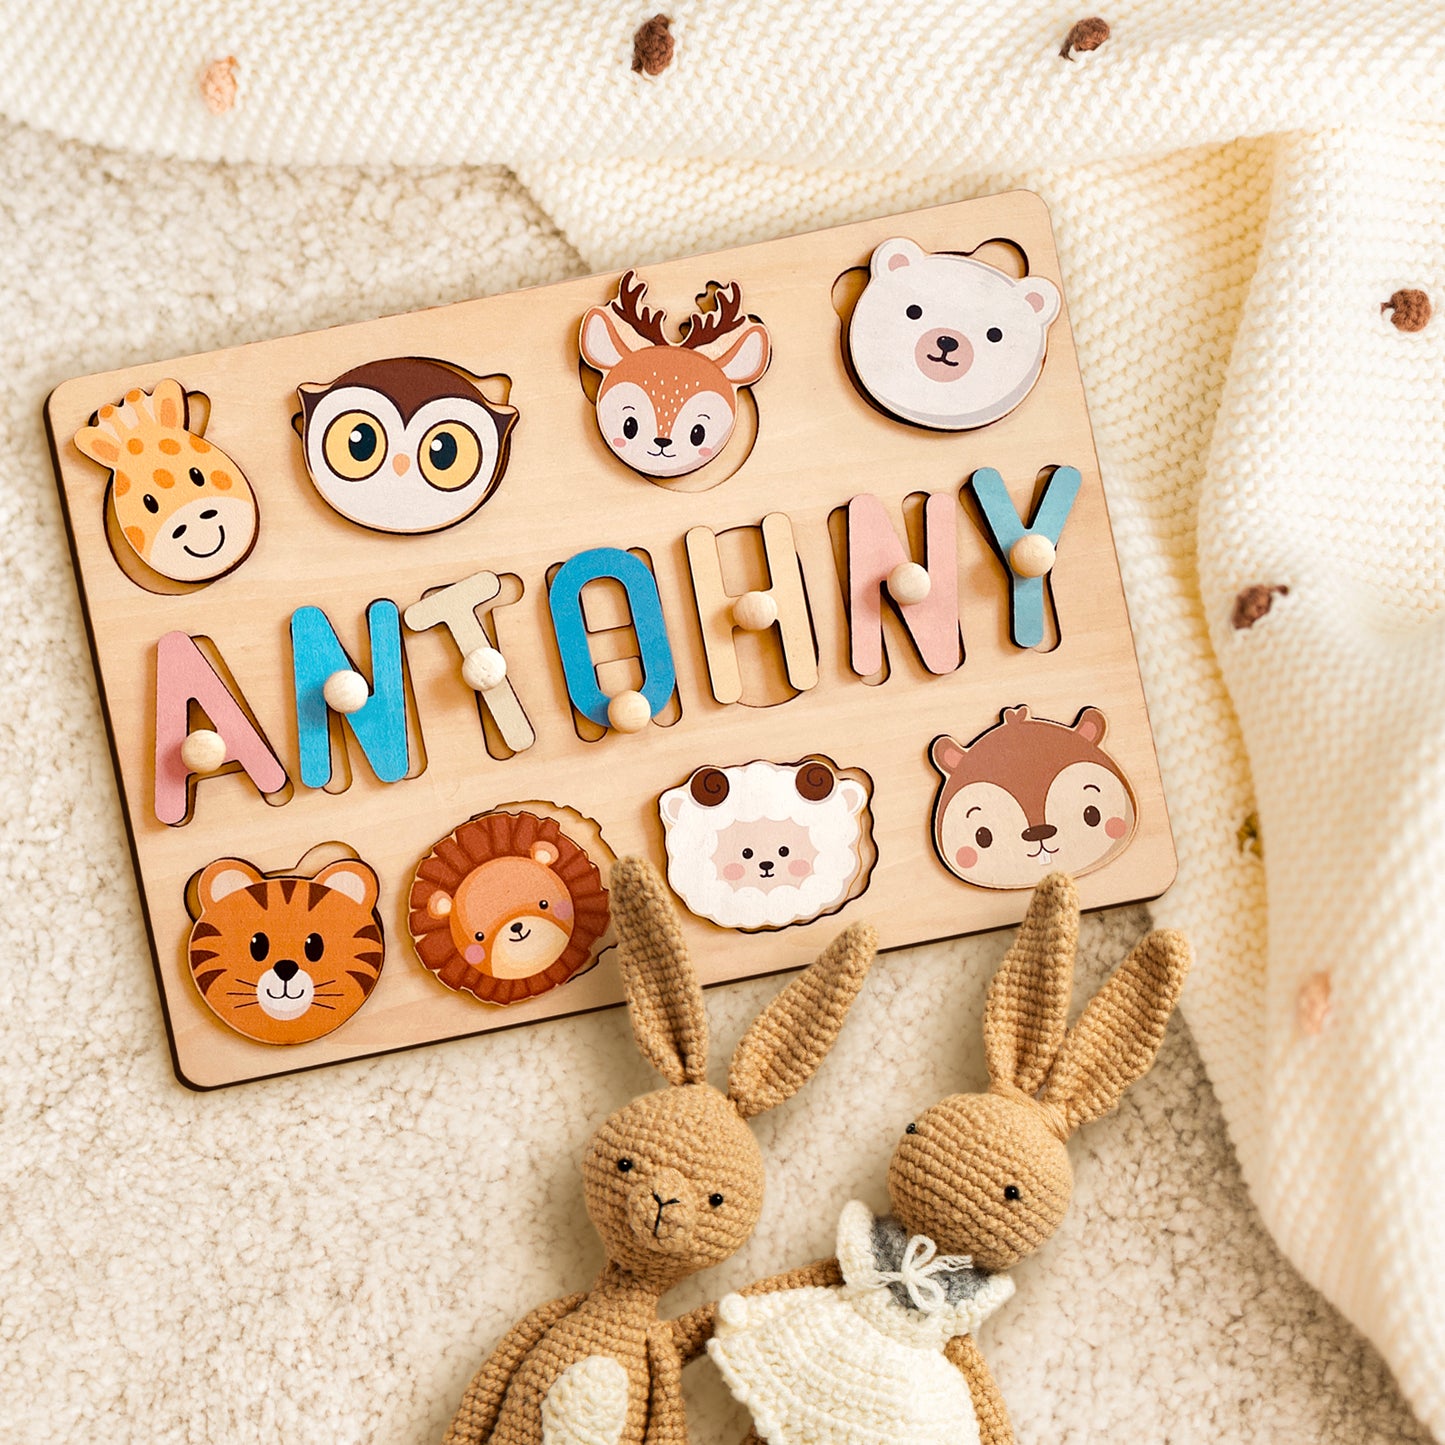 Customizedbee Personalized Name Puzzle,2 line,Wooden Puzzles for Toddlers 1-3, Easter Gifts for Toddlers